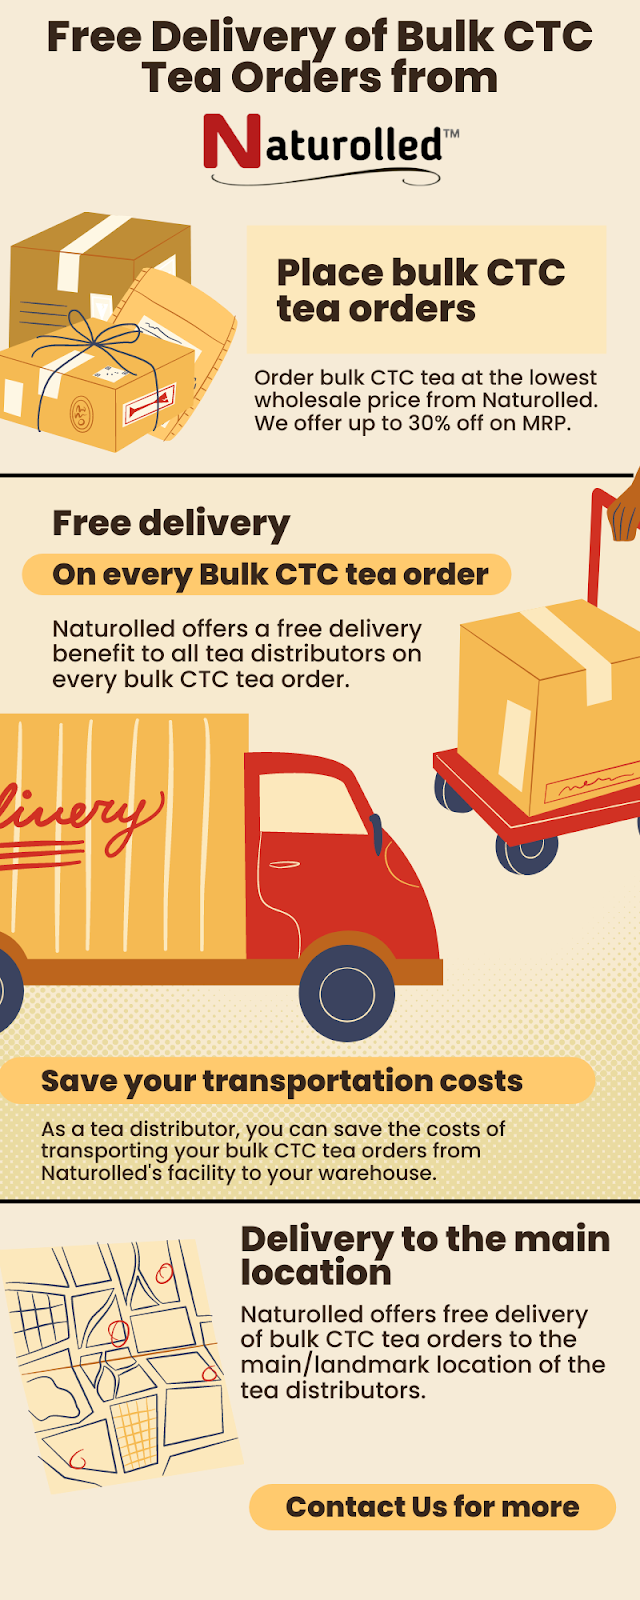 Free delivery of bulk CTC orders from Naturolled- Infographic